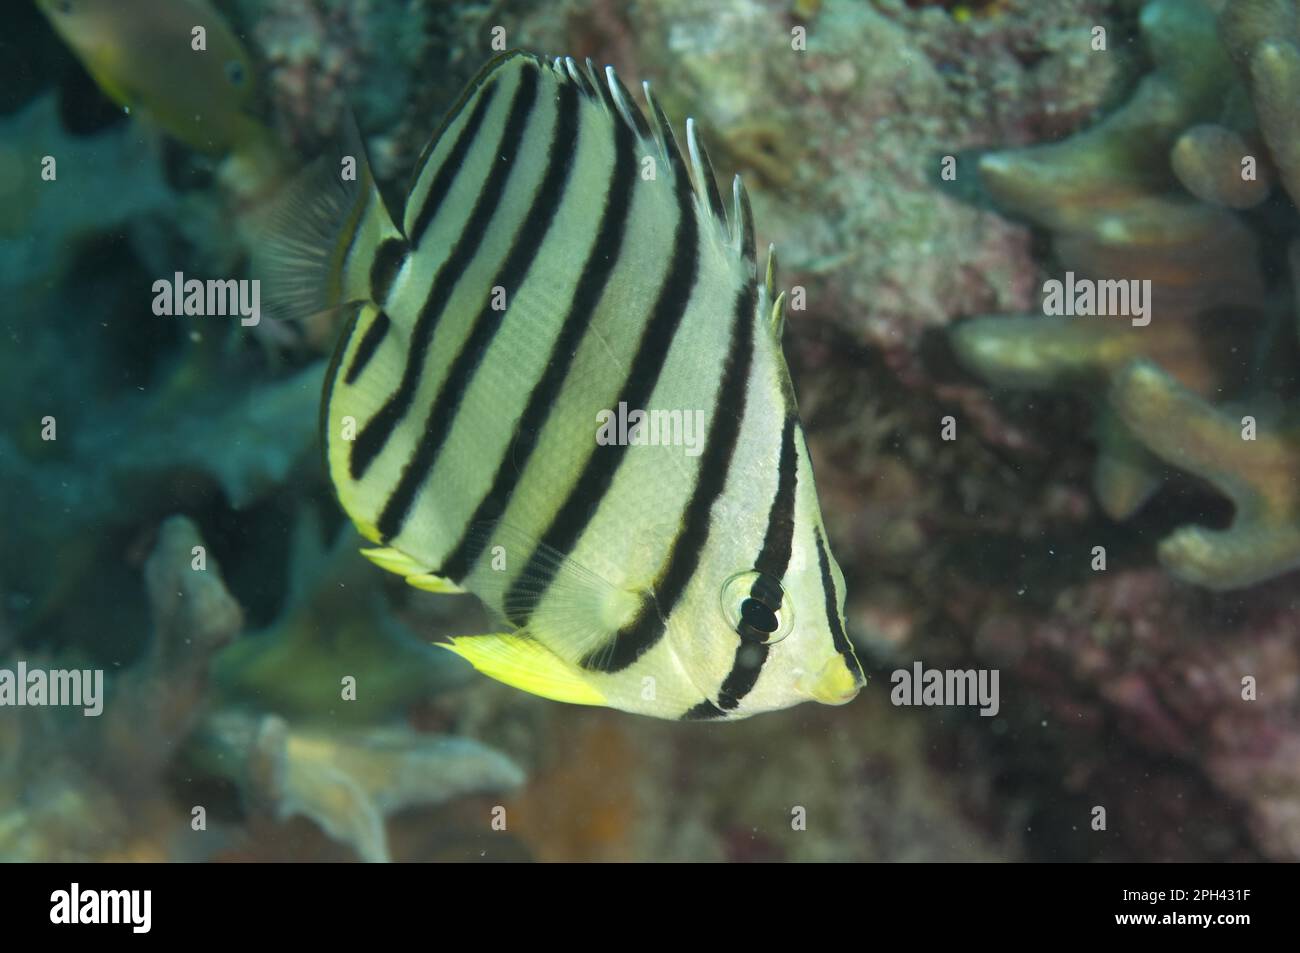 Eight-banded Butterflyfish (Chaetodon octofasciatus), eightband butterflyfish, Other animals, Fish, Perch-like, Animals, Butterflyfish, Eight-banded Stock Photo